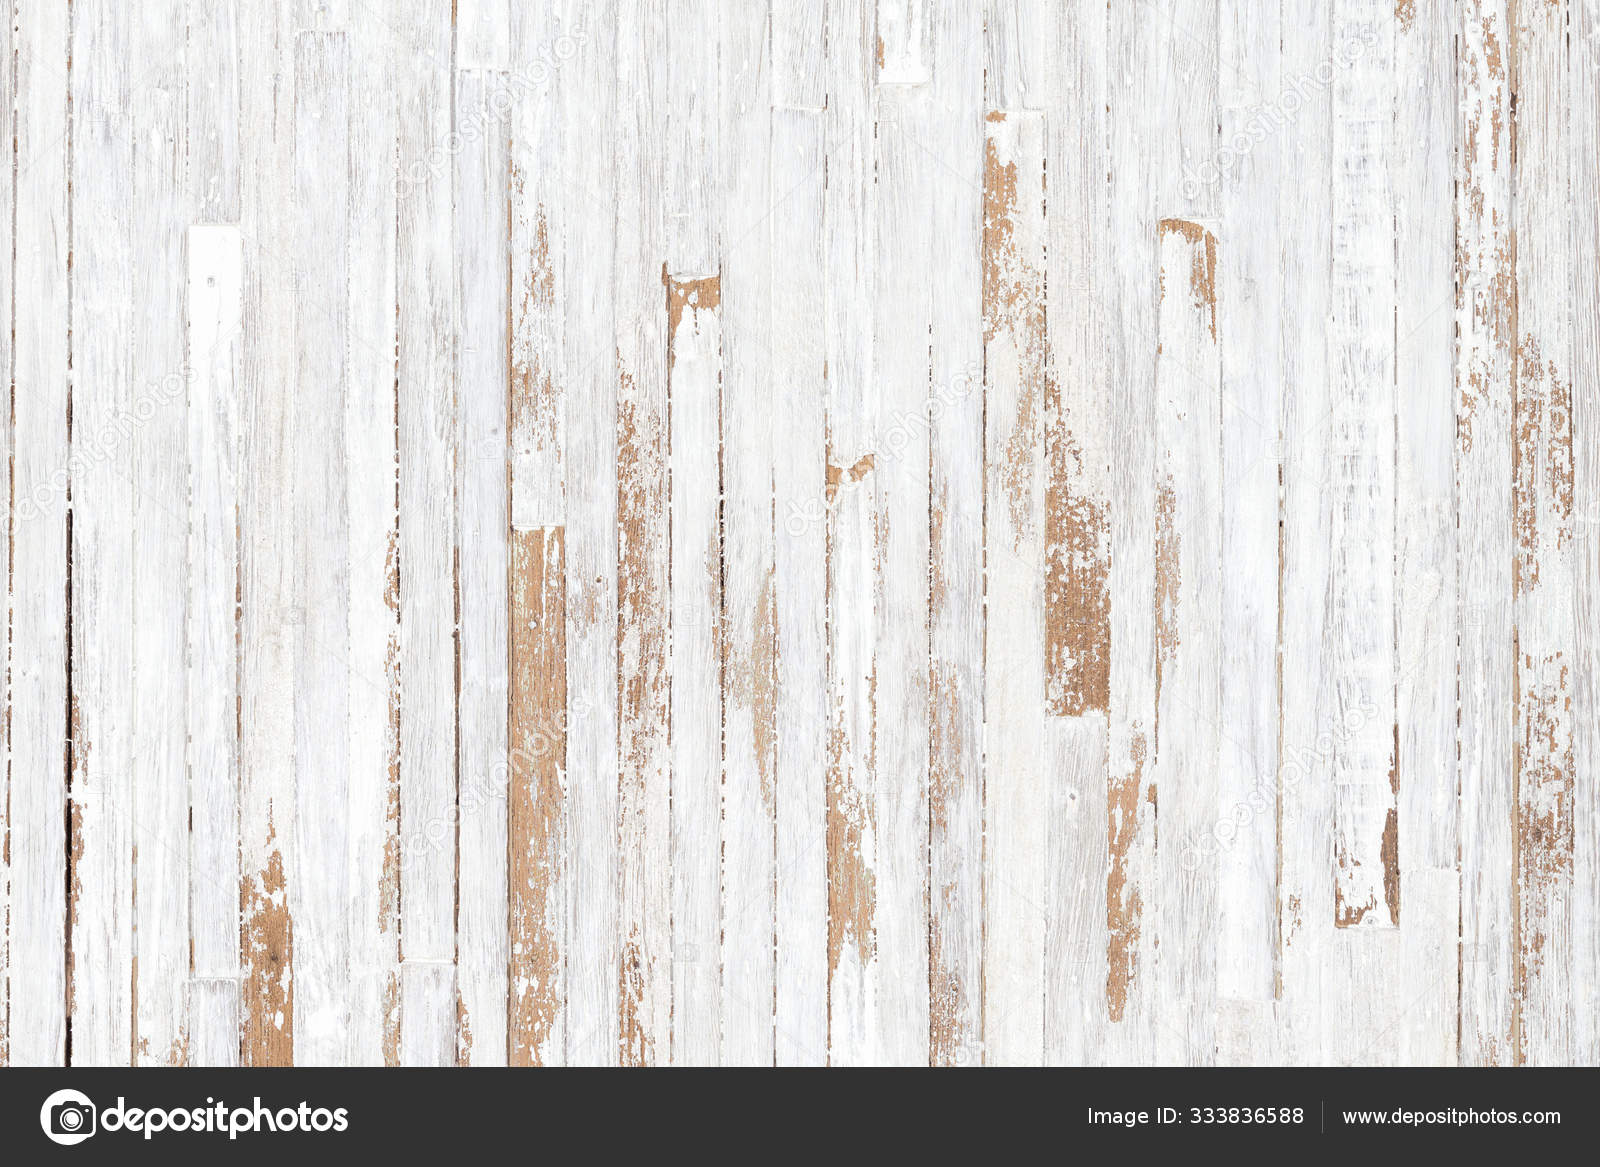 White Painted Wood Texture Seamless Rusty Grunge Background Scratched White  Paint On Planks Of Wood Wall Stock Photo - Download Image Now - iStock